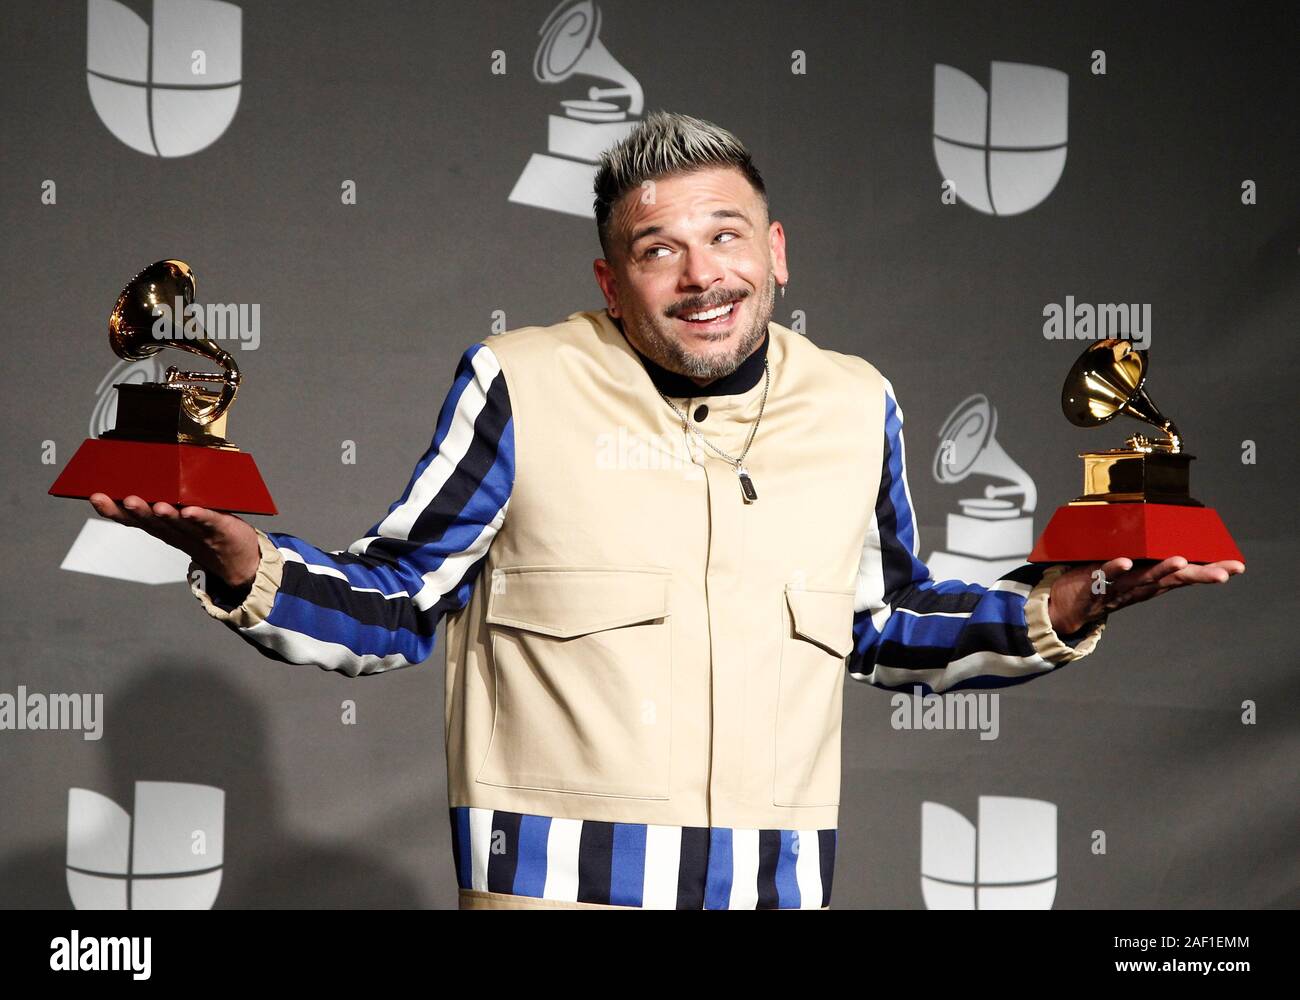 Las Vegas, United States. 12th Dec, 2019. Pedro Capo appears backstage with  the awards for best urban fusion/performance for "Calma (Remix)" and song  of the year for "Calma" during the 20th annual